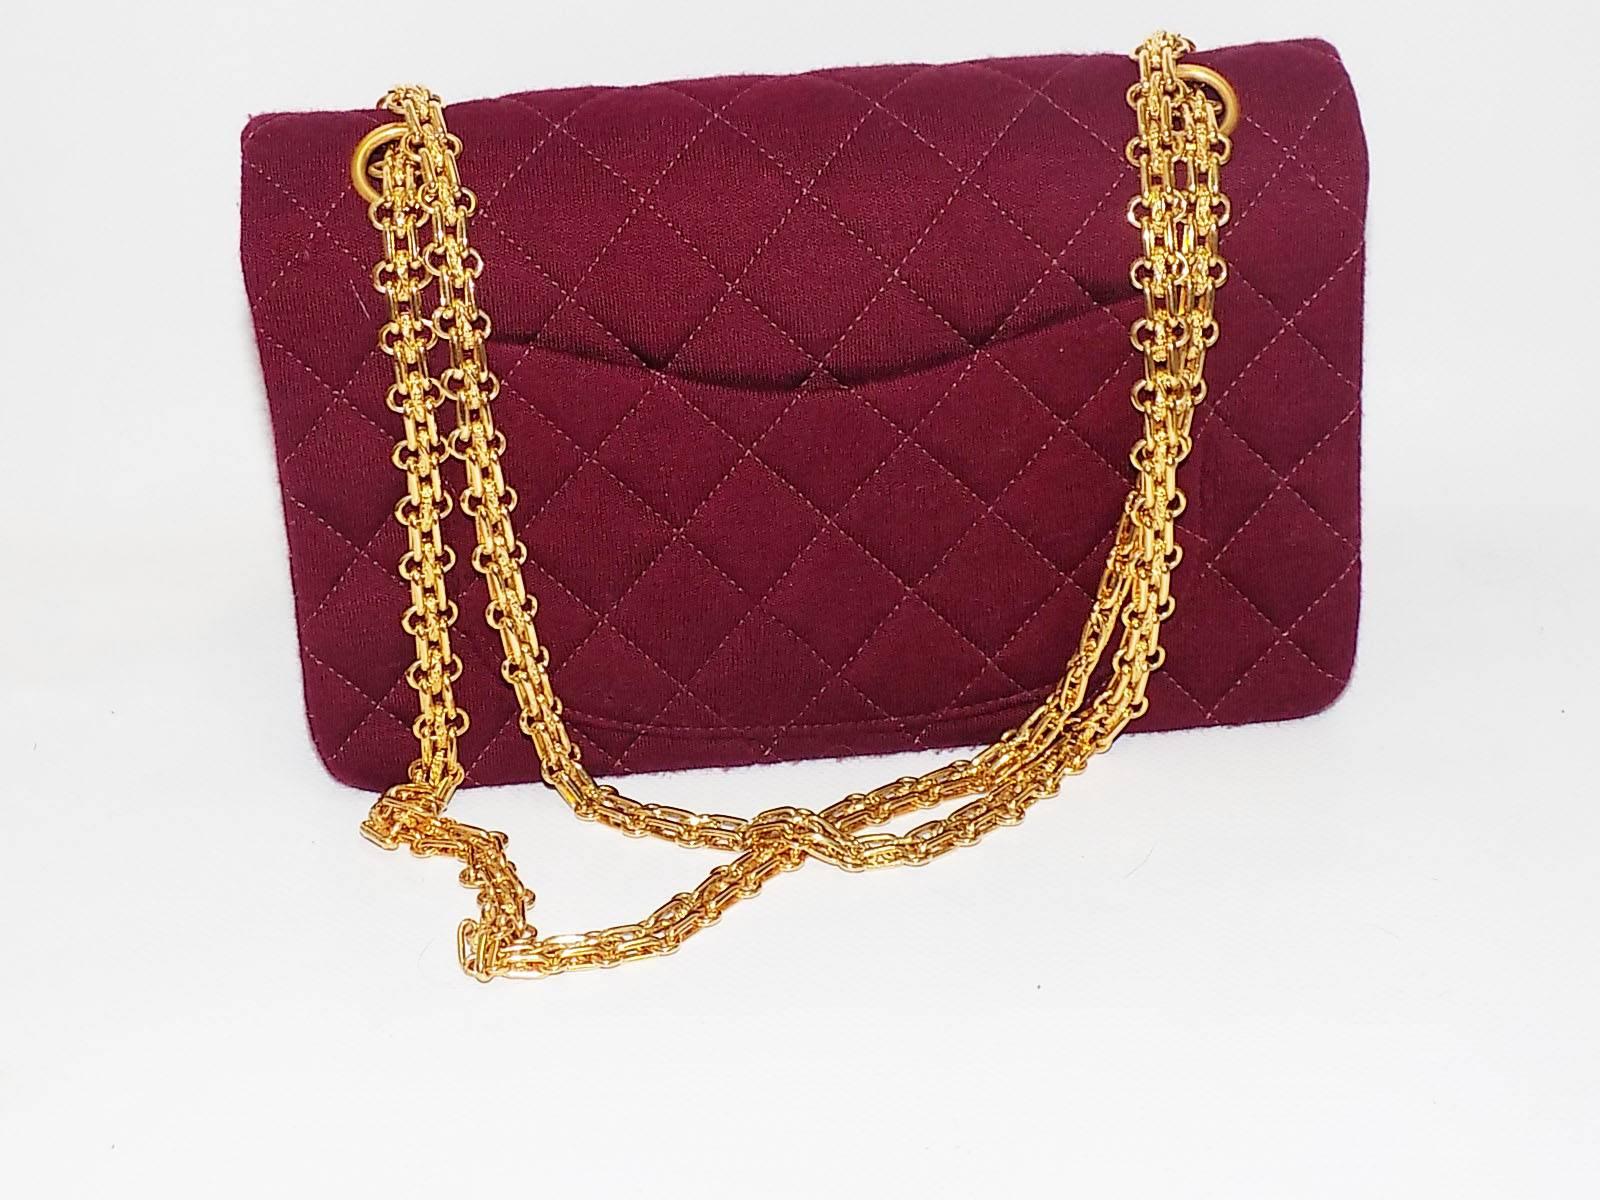 This iconic Chanel 2.55 will be the next classic you'll want to add to your collection! Its burgundy jersey exterior is designed with a quilted stitch and gold tone hardware. Must-have for any Chanel gal, this item, also referred to as the classic